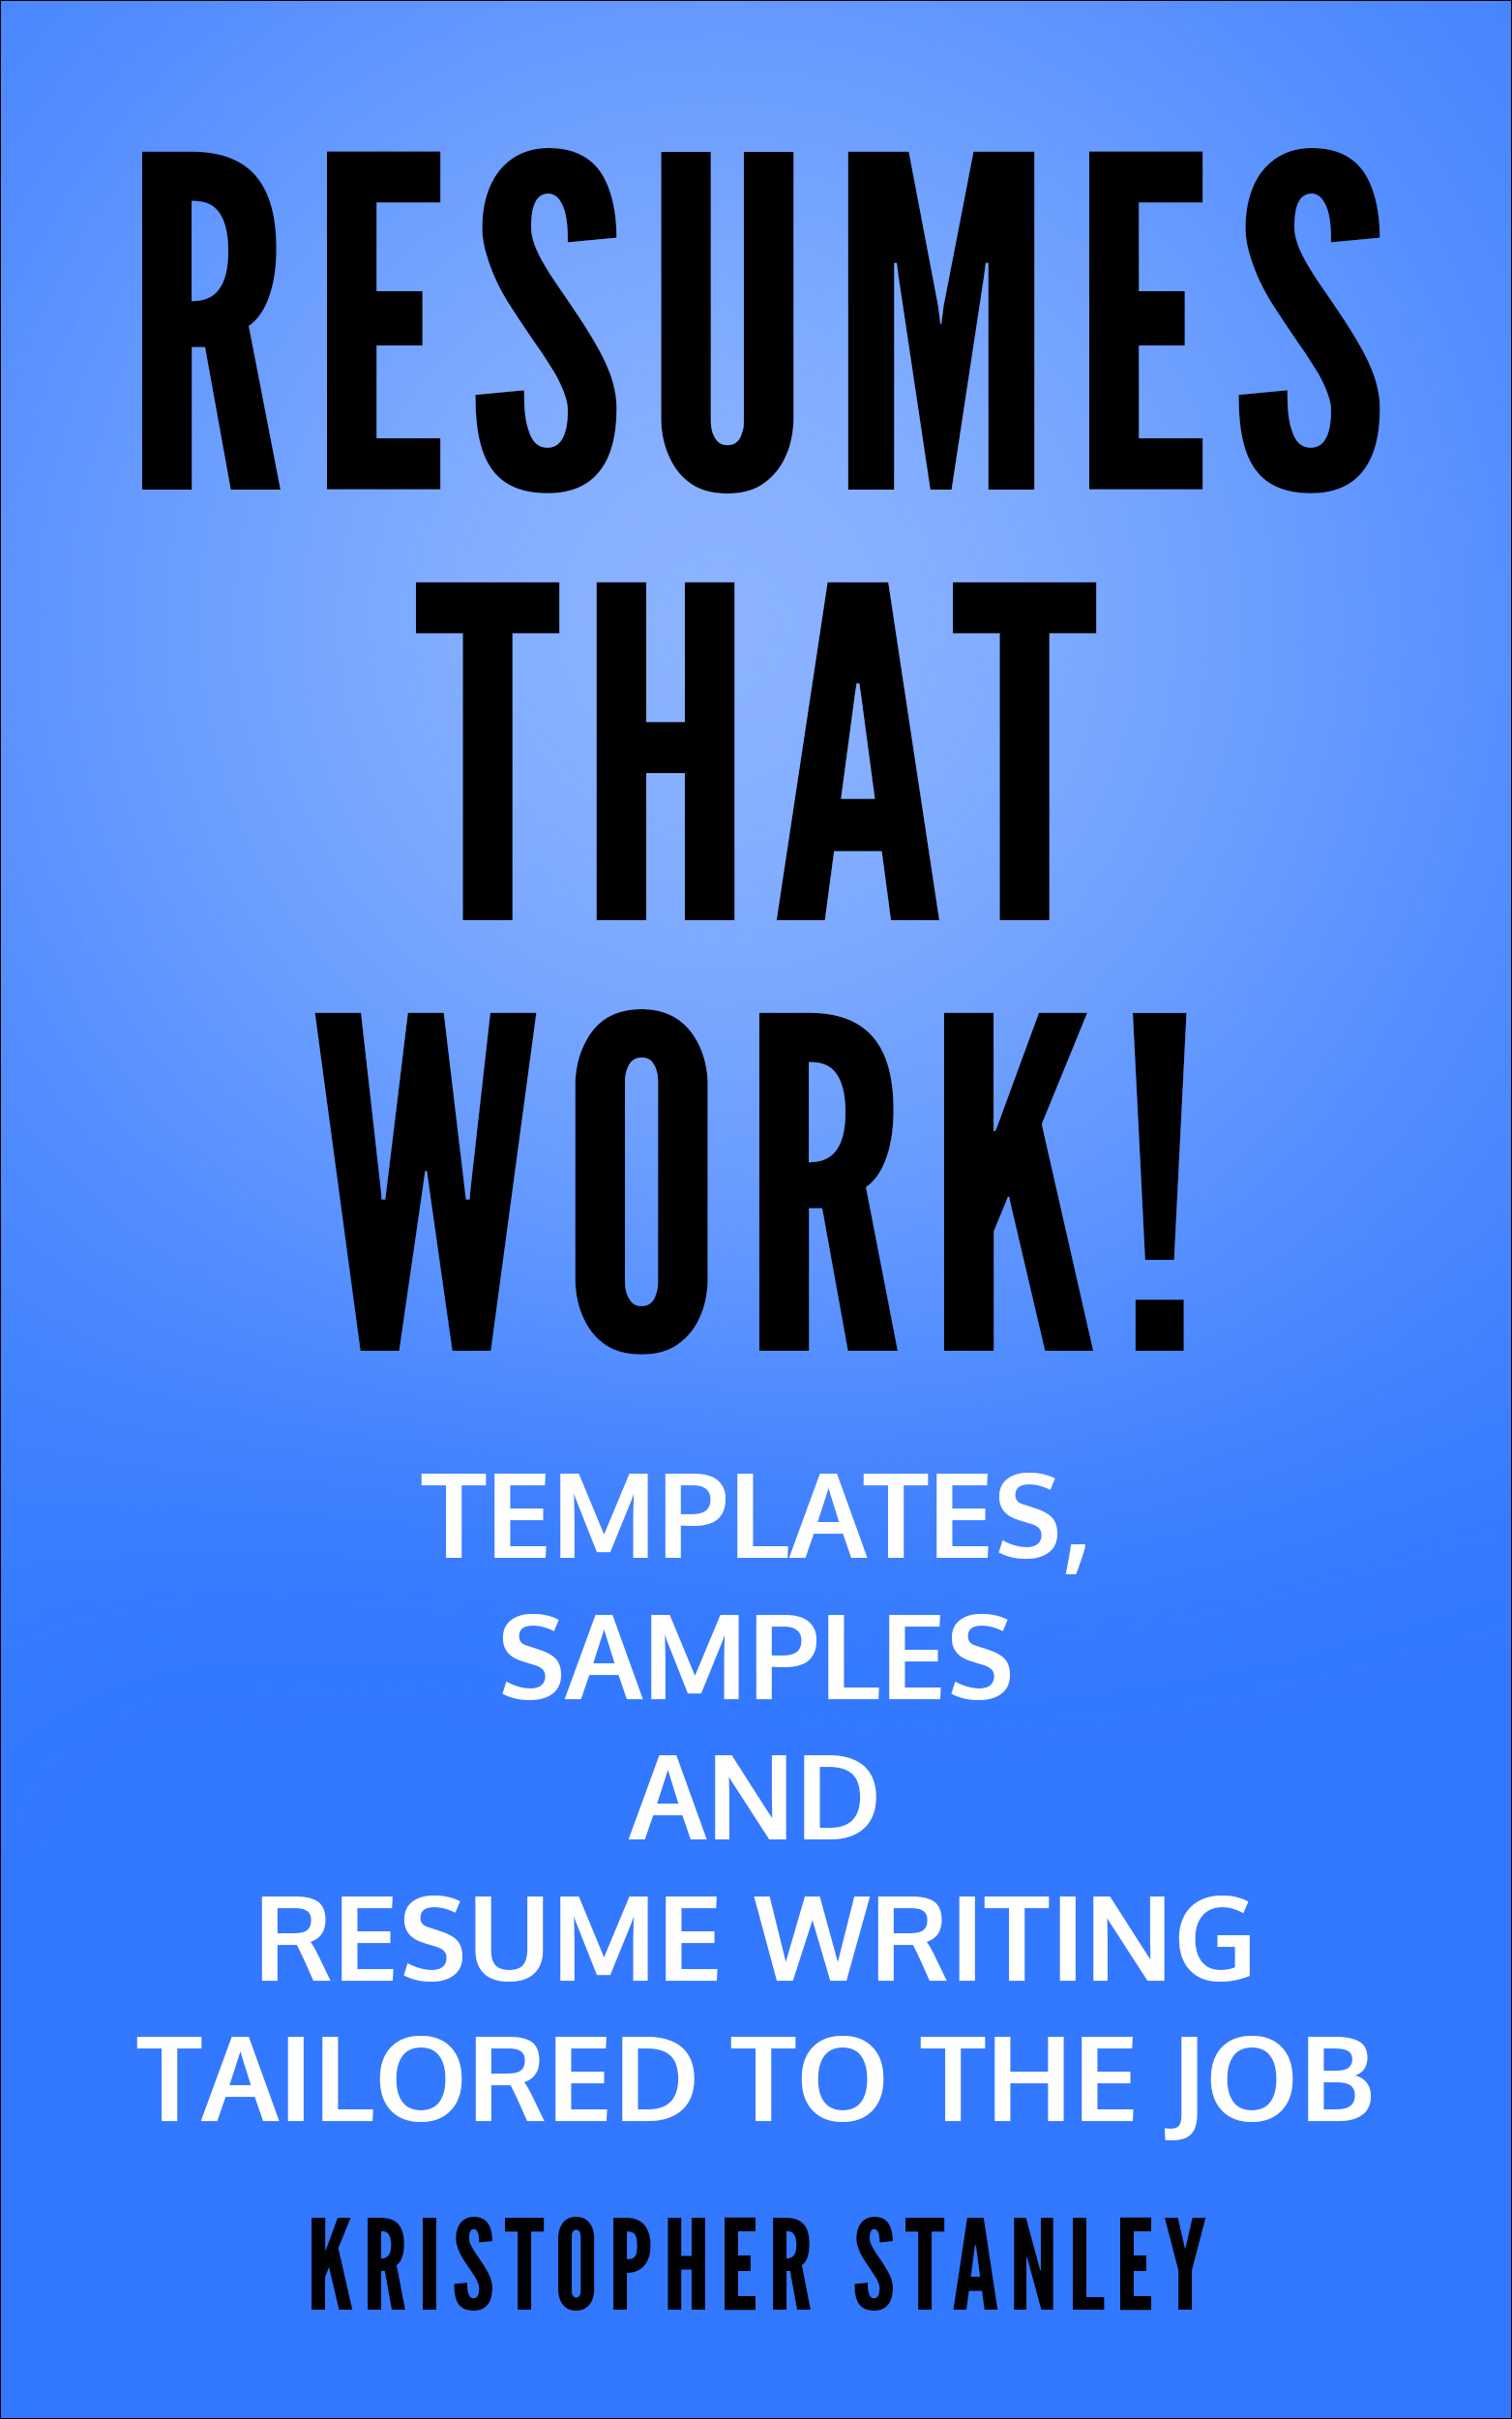 FREE: Resumes that Work! by Kristopher Stanley